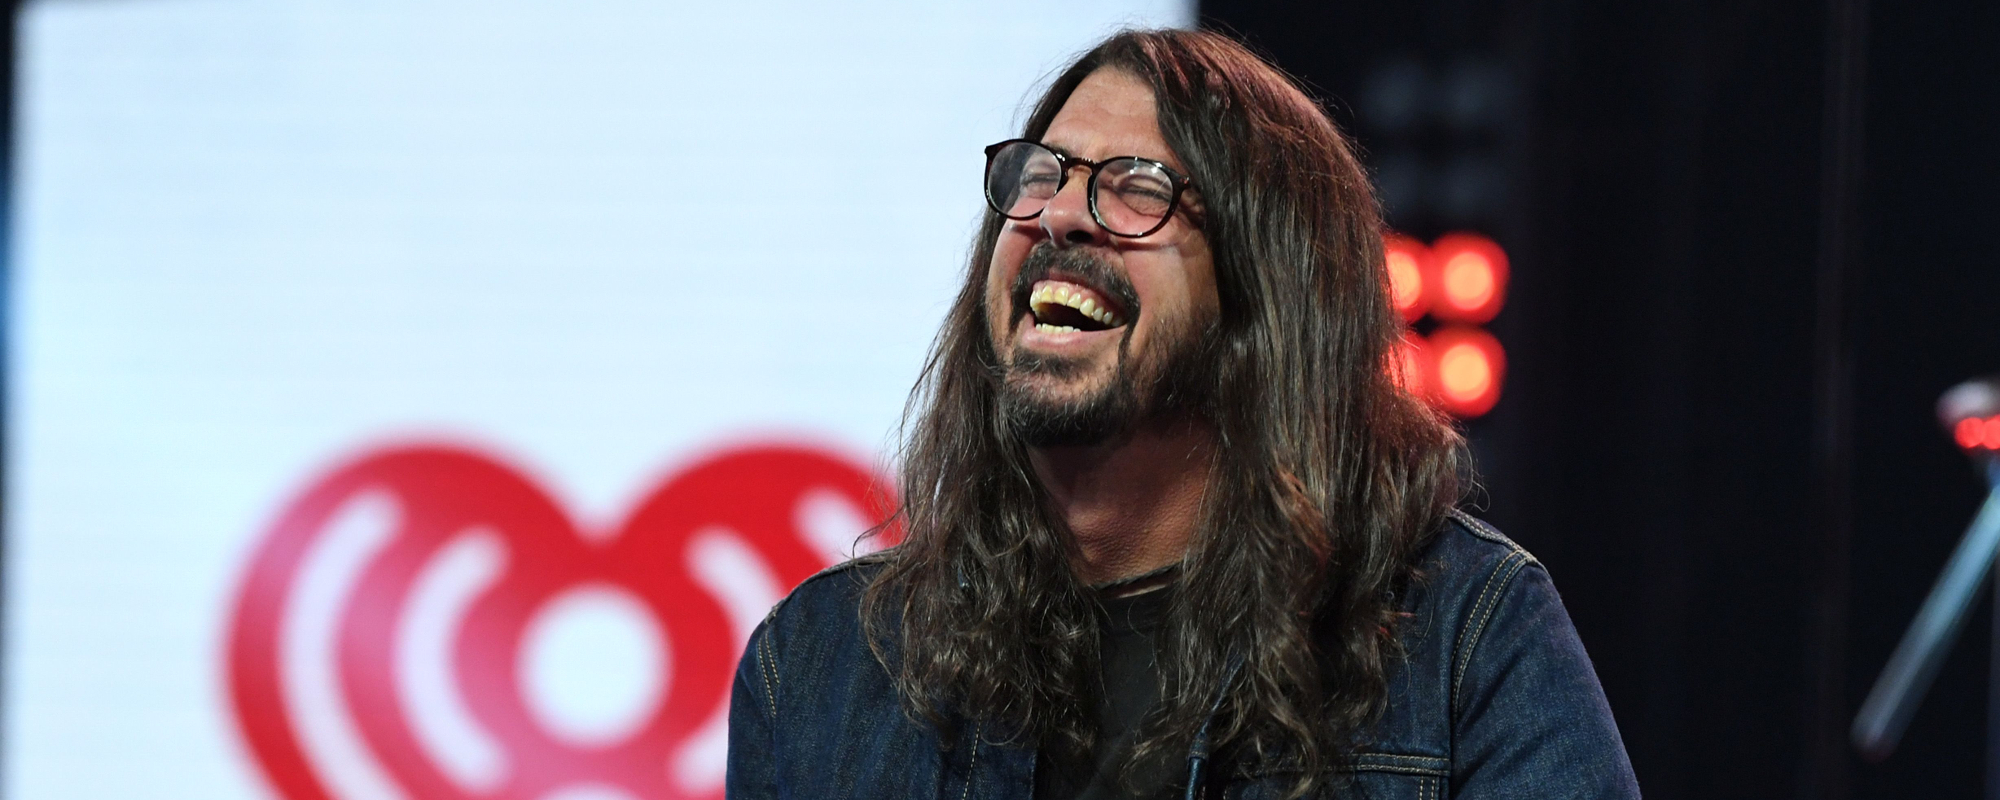 Foo Fighters’ Dave Grohl Welcomes 11-Year-Old Drummer on Stage in L.A.